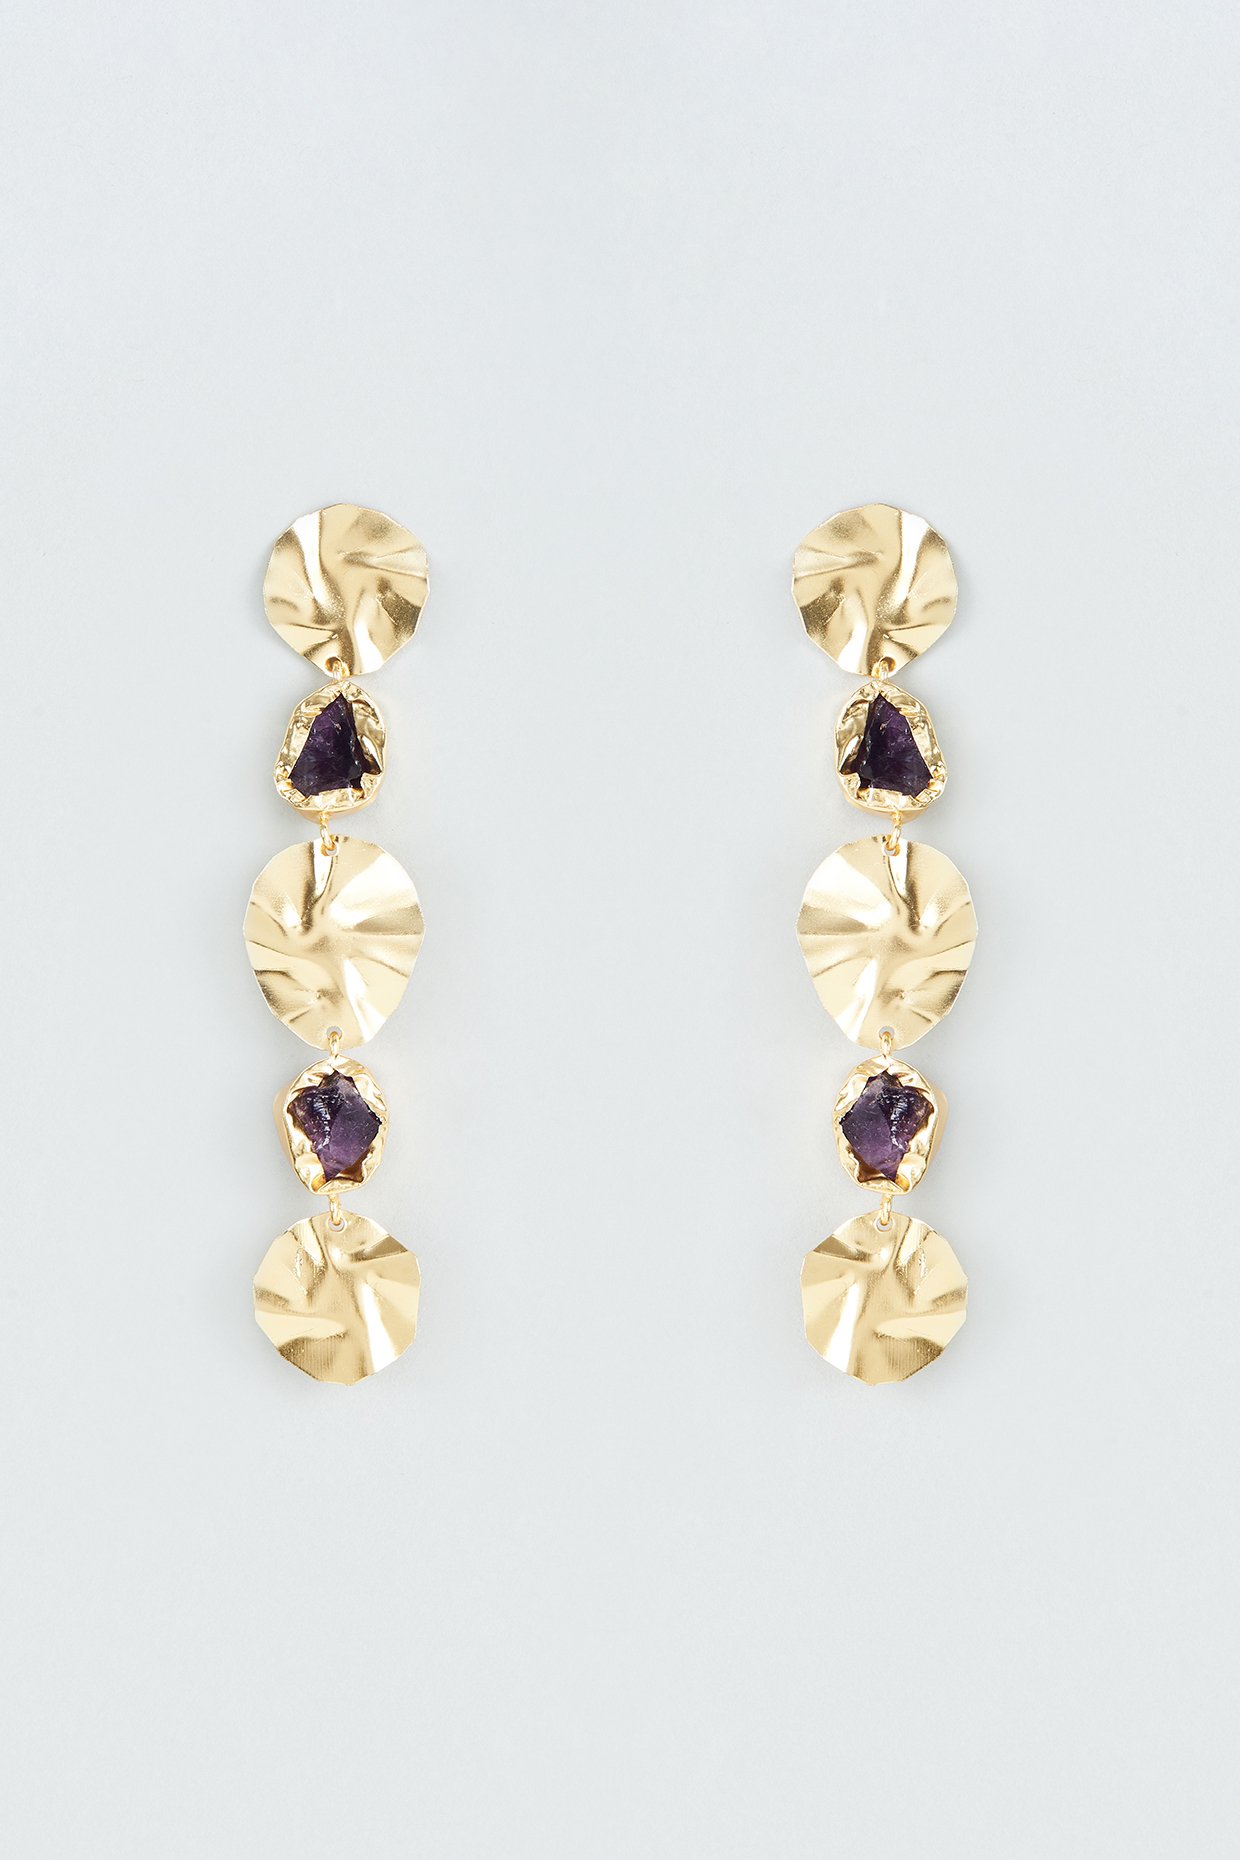 Natural Oval Amethyst Stud Earrings in 14k Gold 4 Prong Studs, 7x5mm